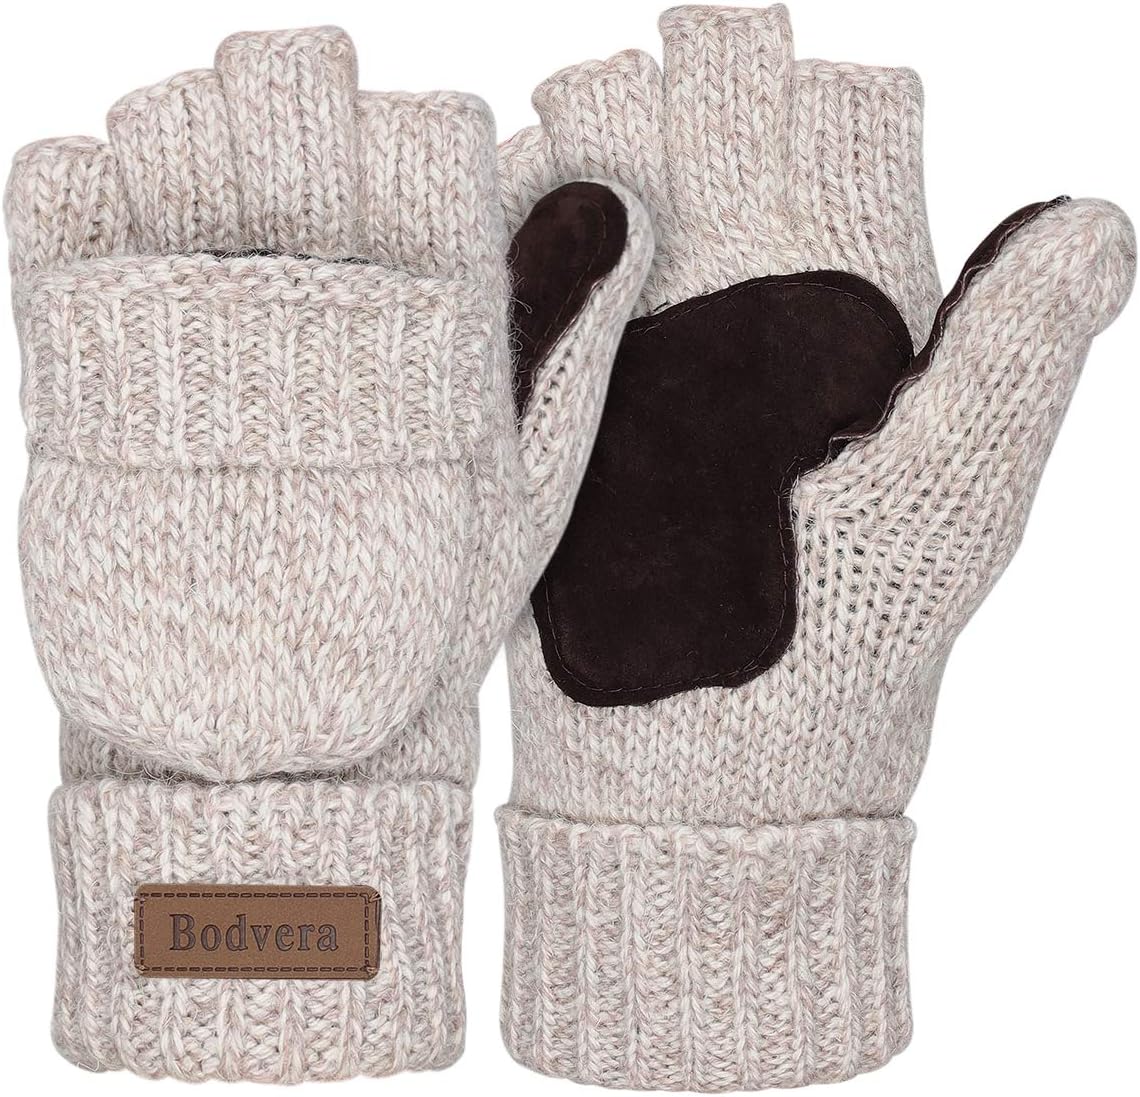 Snag Your Discount on Bodvera Thermal Insulation Fingerless Texting Wool Gloves - Limited Time Offer!